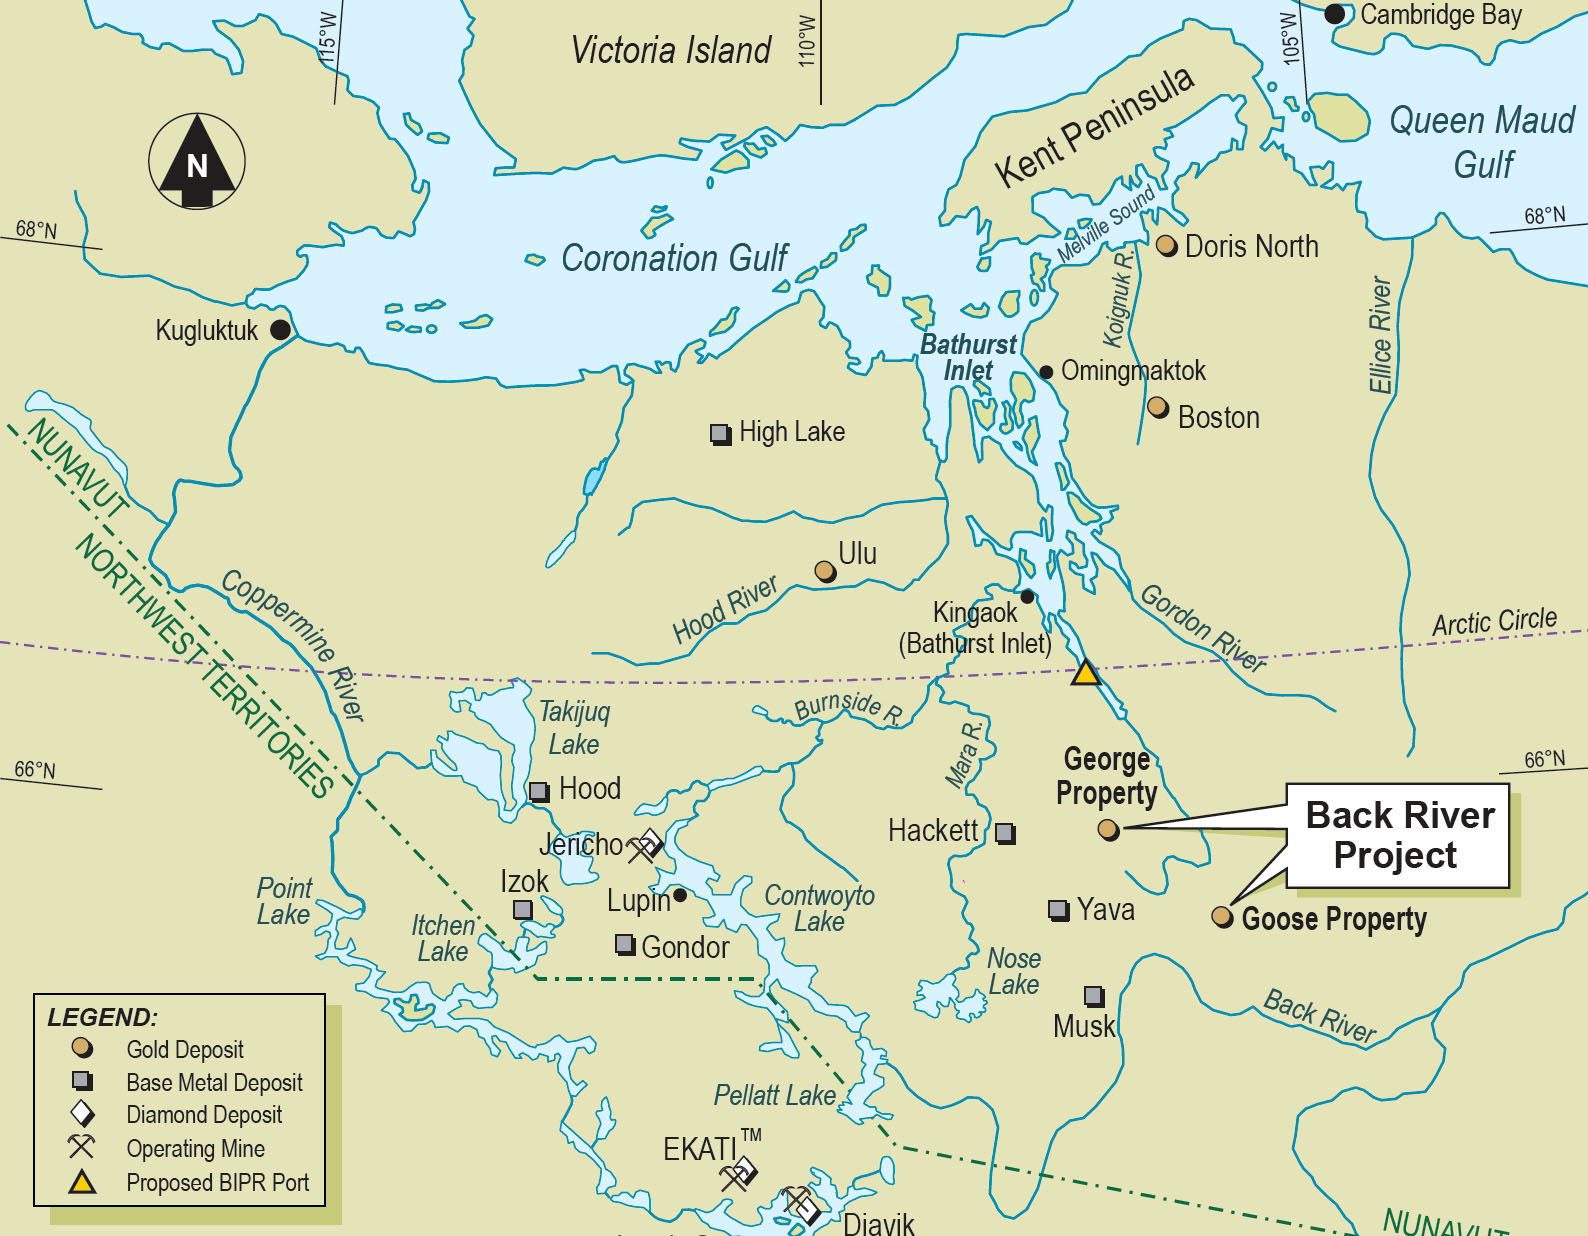 This map shows the original version of Sabina's Back River gold project as submitted to the NIRB in 2012. Development of the George property was later deleted from the proposal and was not included in the project that NIRB considered in a public hearing last spring. (Back River Project description)